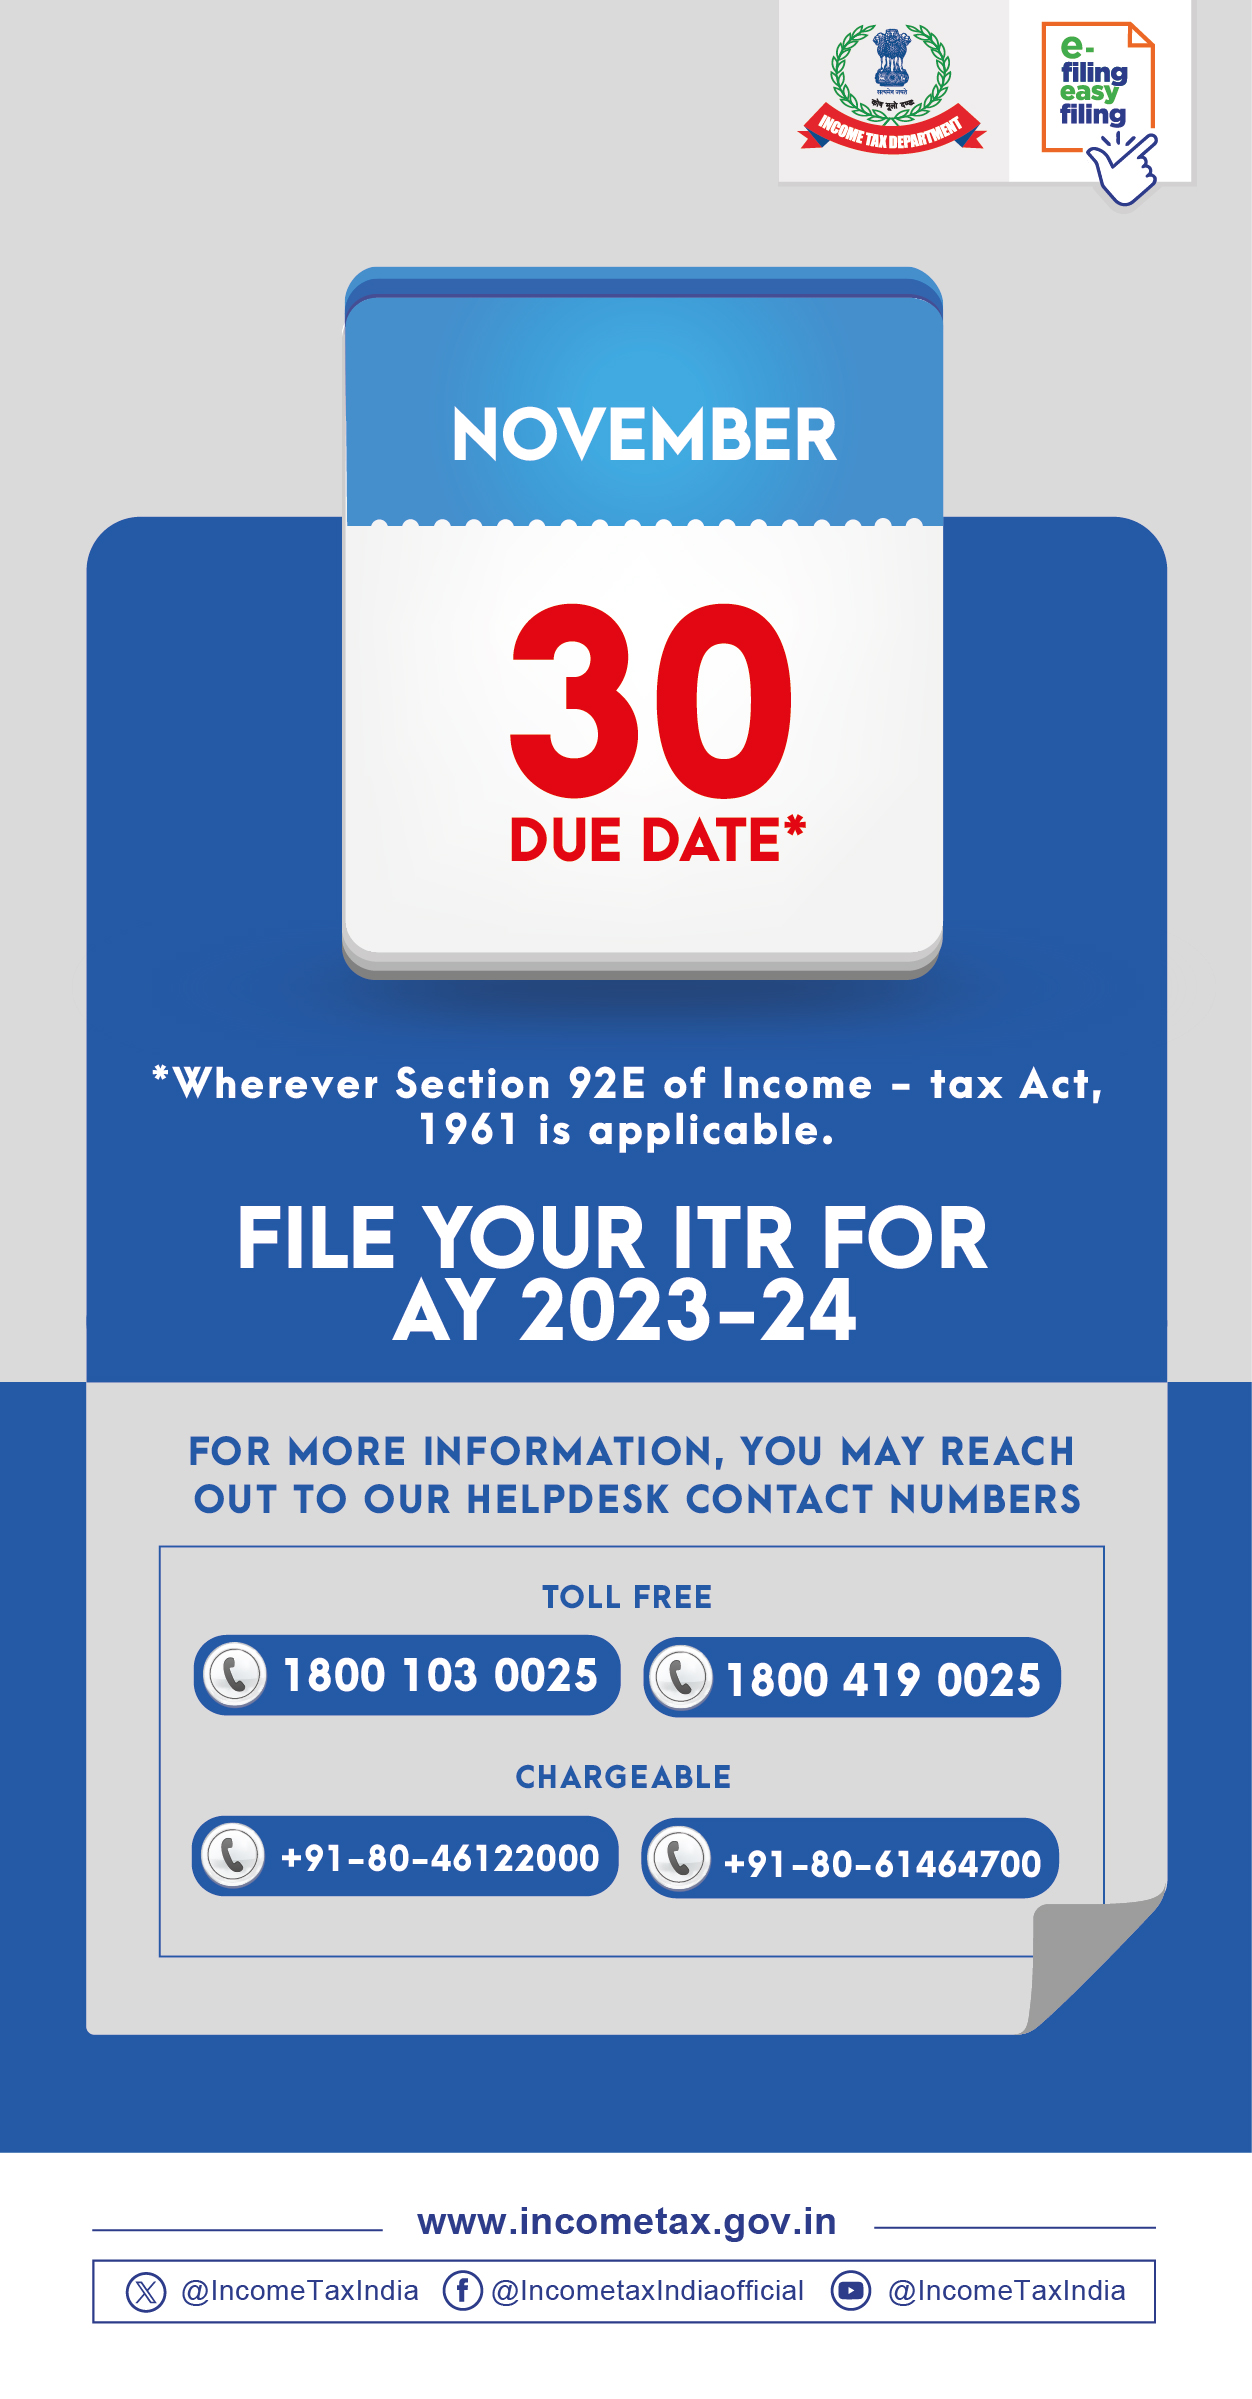 File your ITR for AY2023-24 